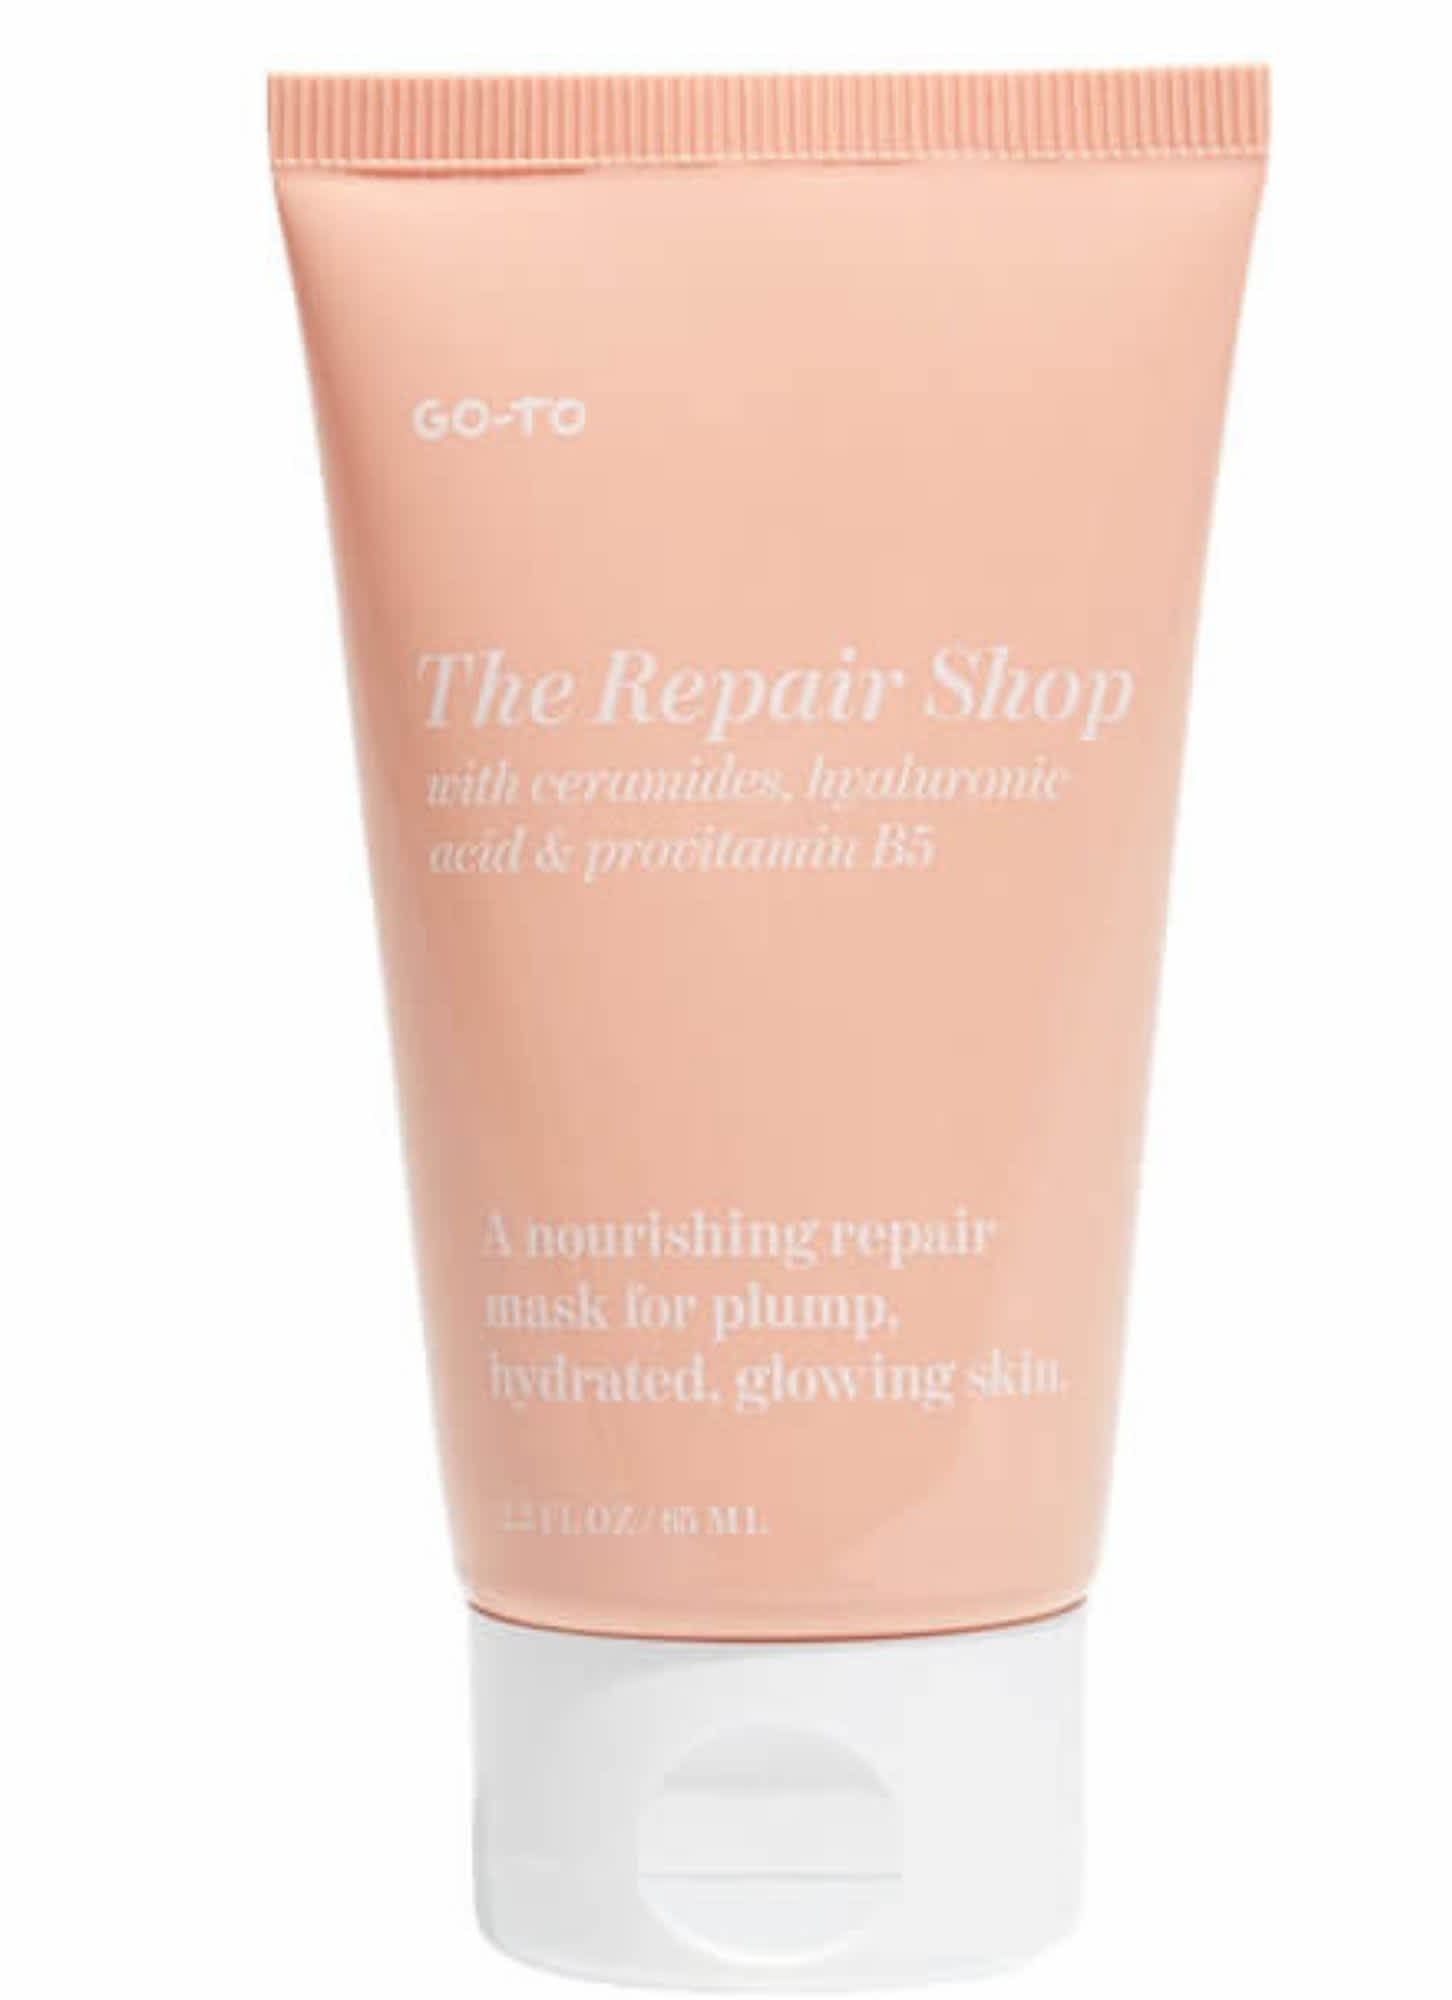 Go-To, The Repair Shop Mask